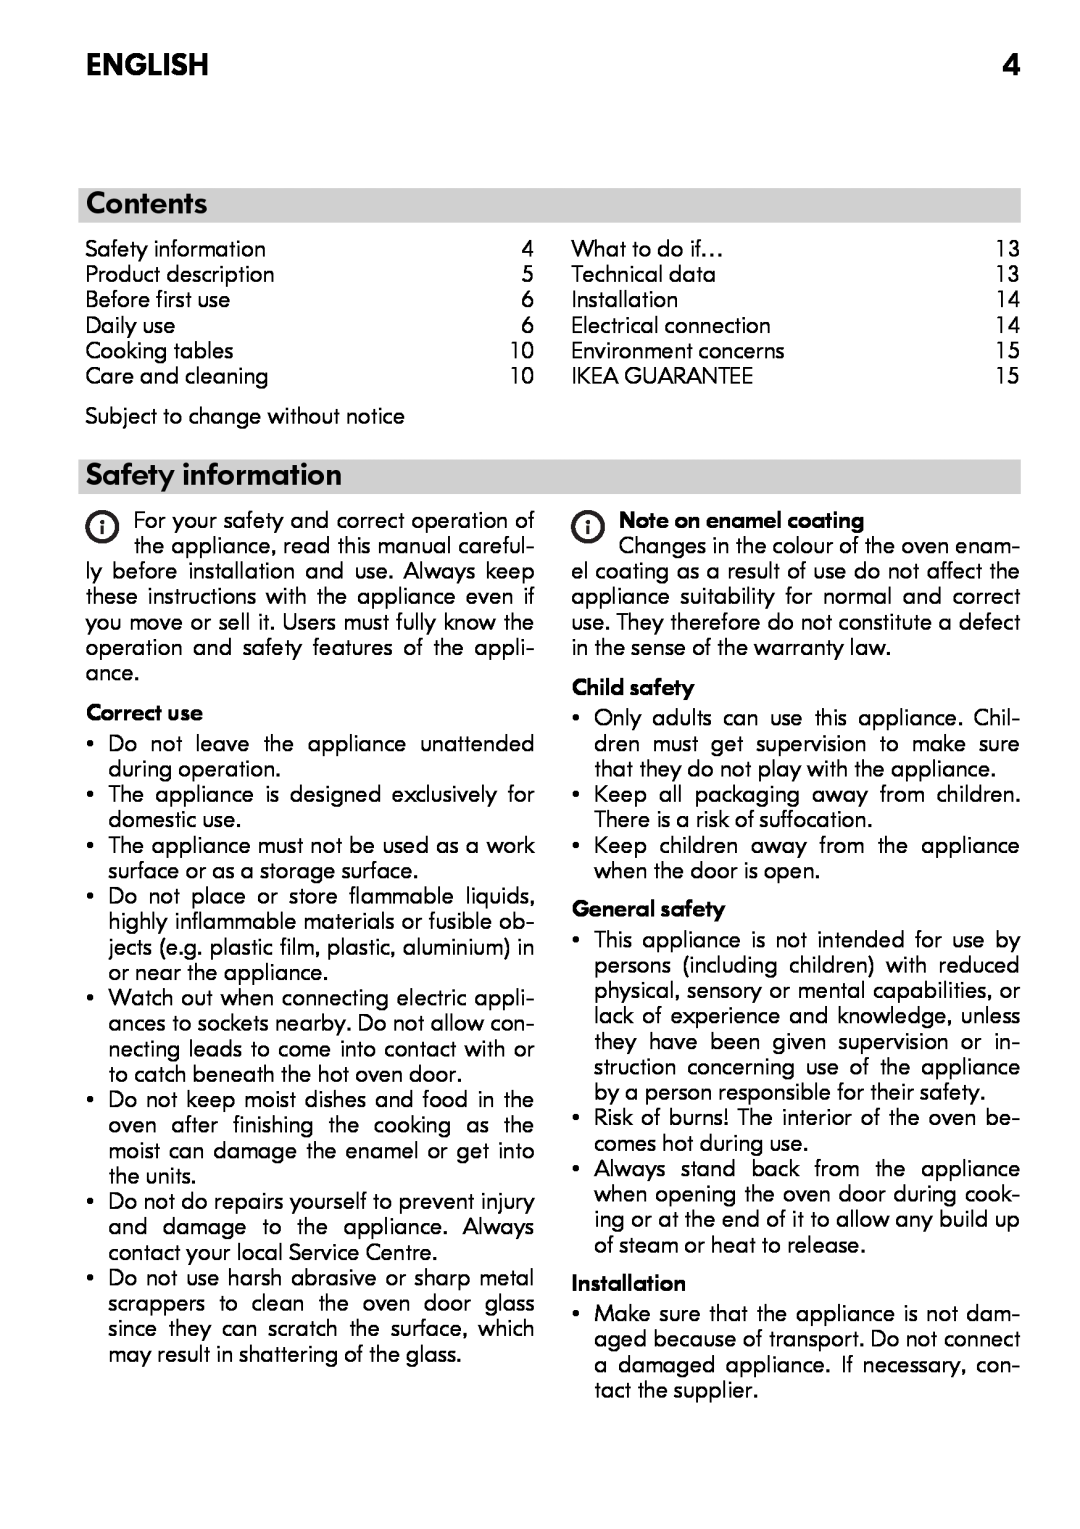 IKEA OV9 manual ENGLISH Contents, Safety information 